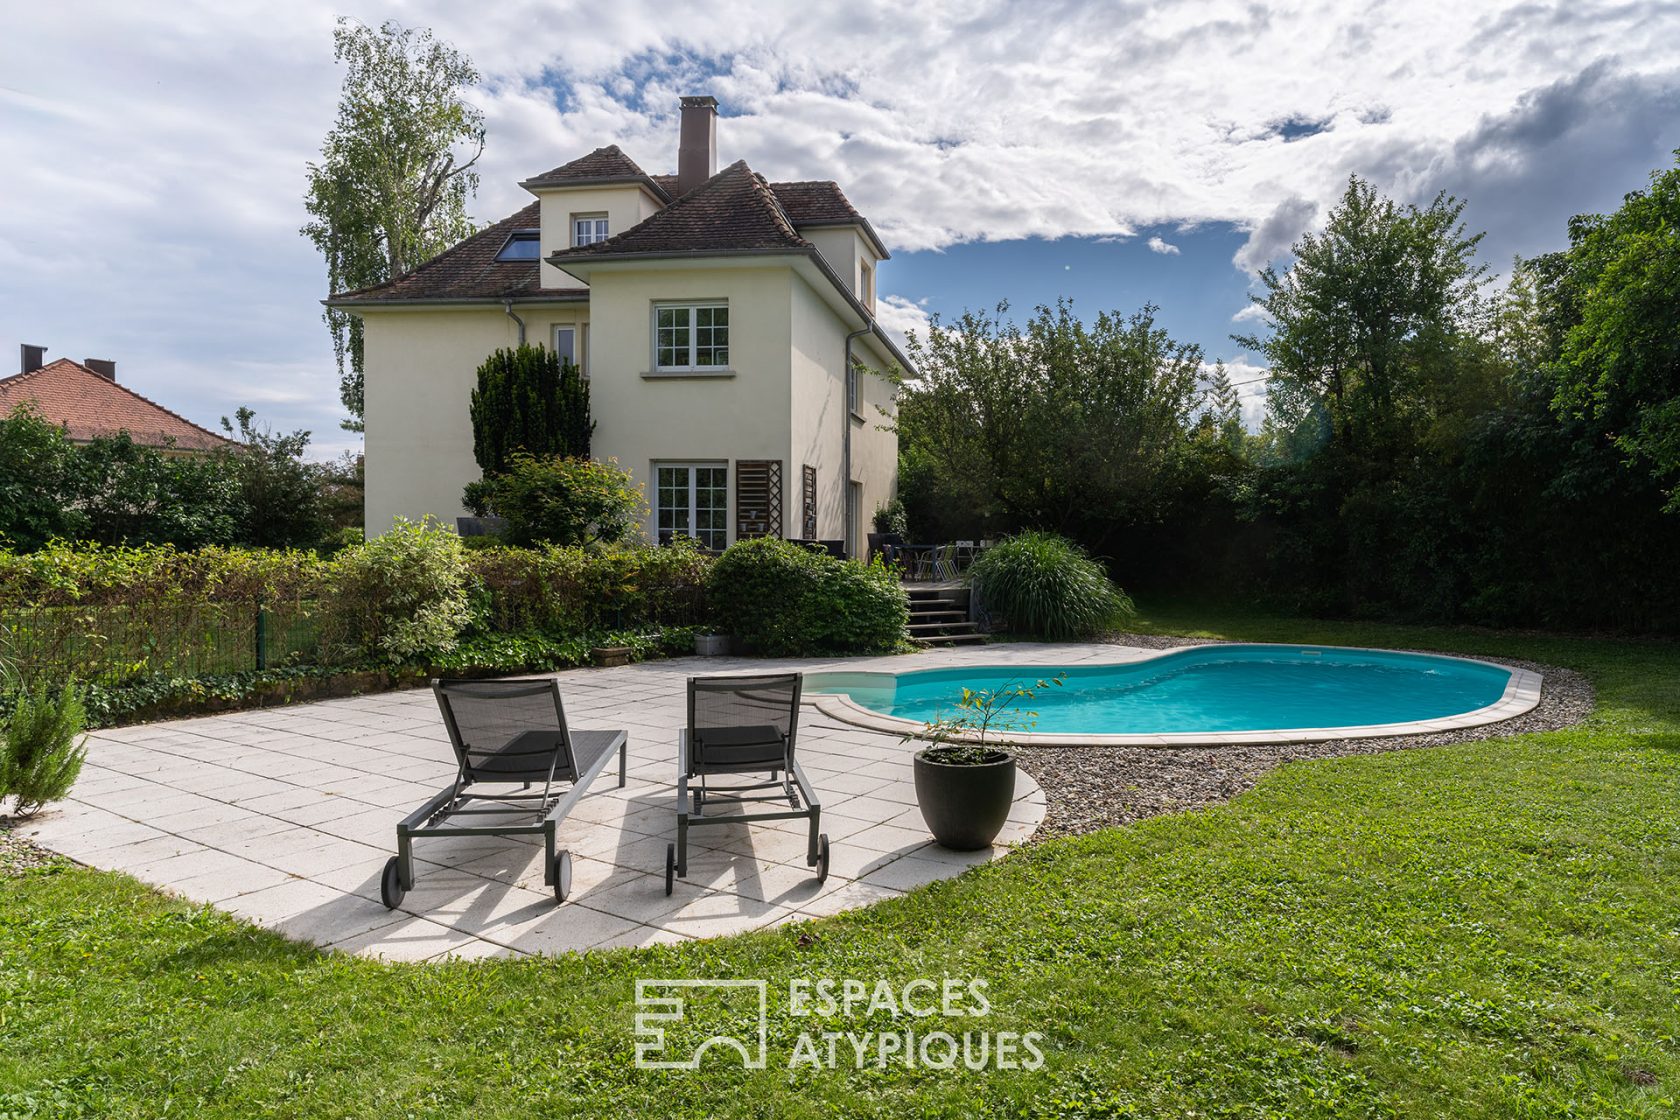 Renovated manor house with swimming pool and leafy garden